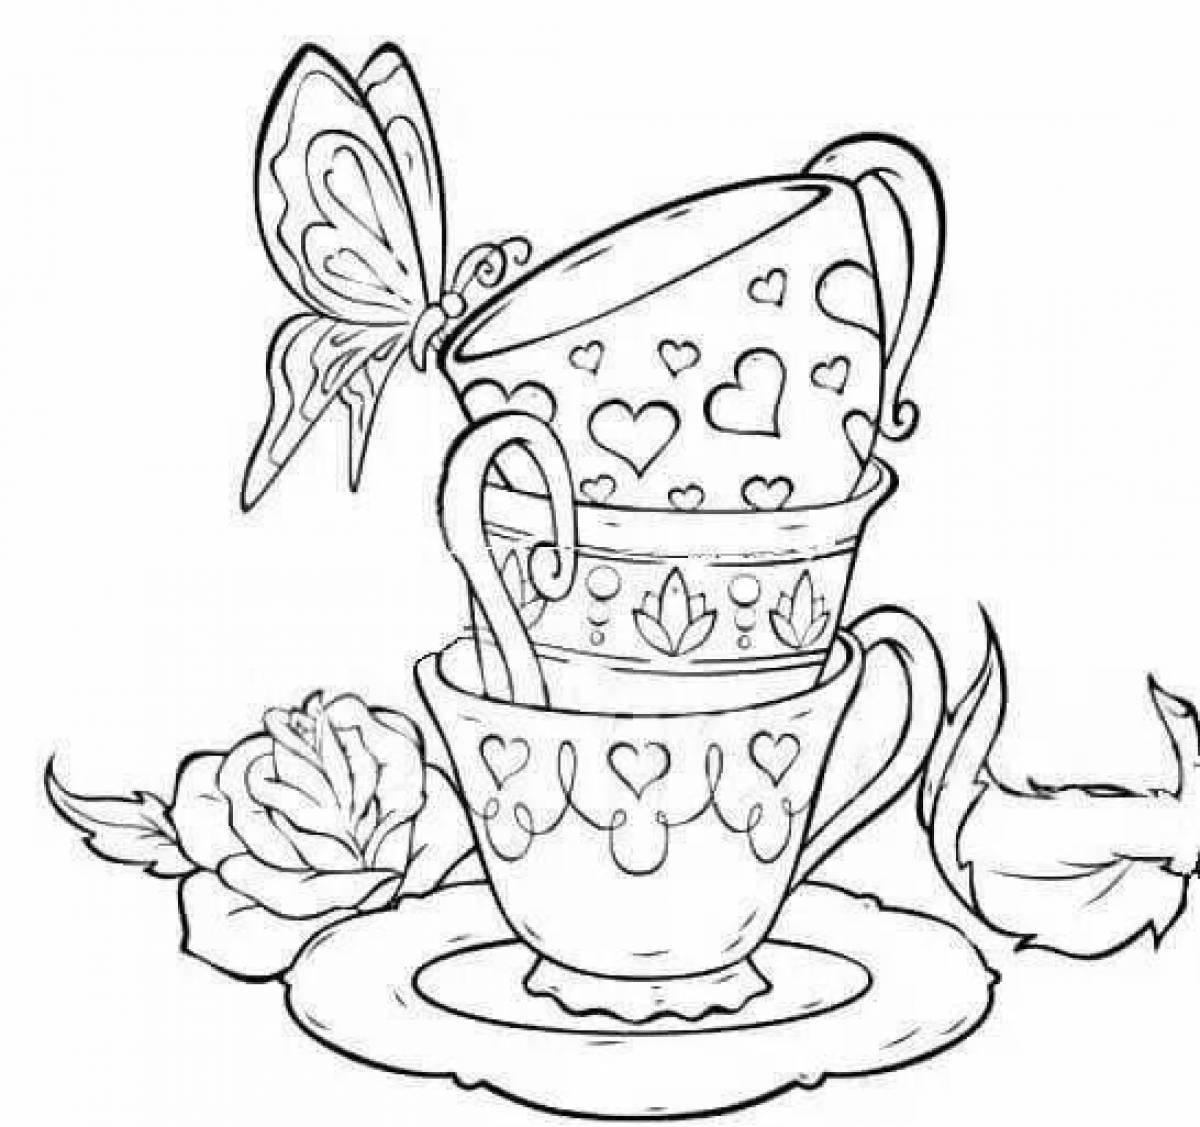 Awesome tea cup coloring page